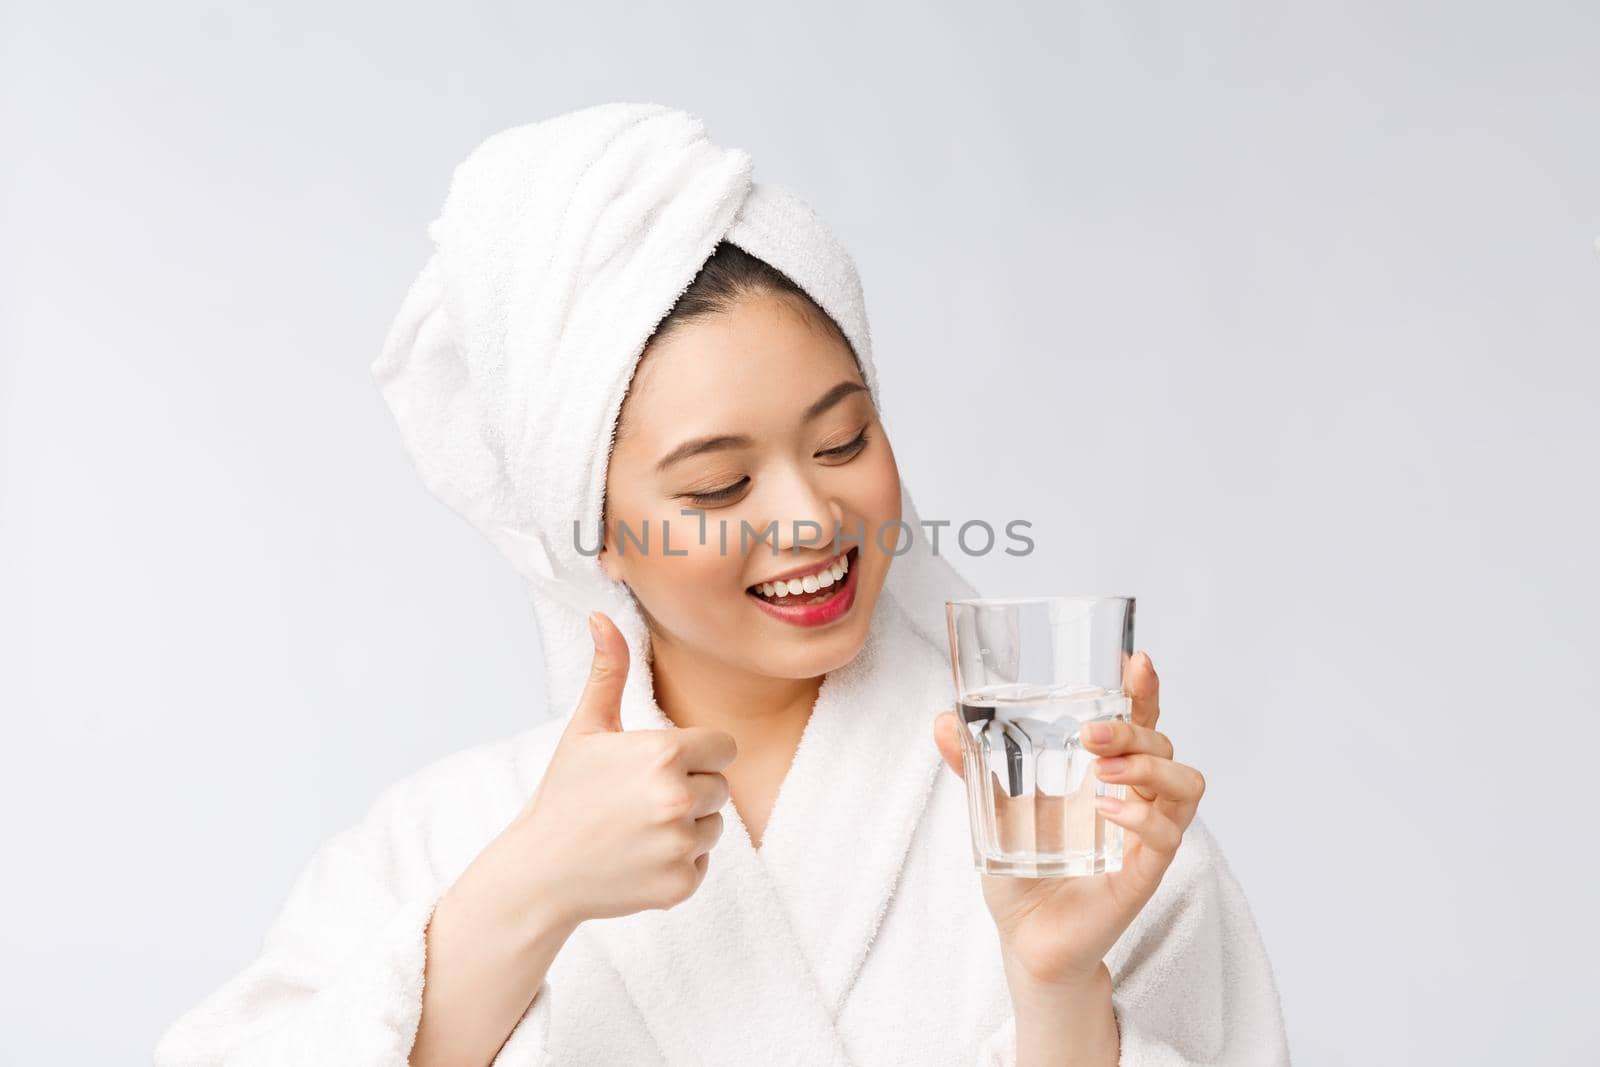 Healthy young beautiful woman drinking water, beauty face natural makeup, isolated over white background